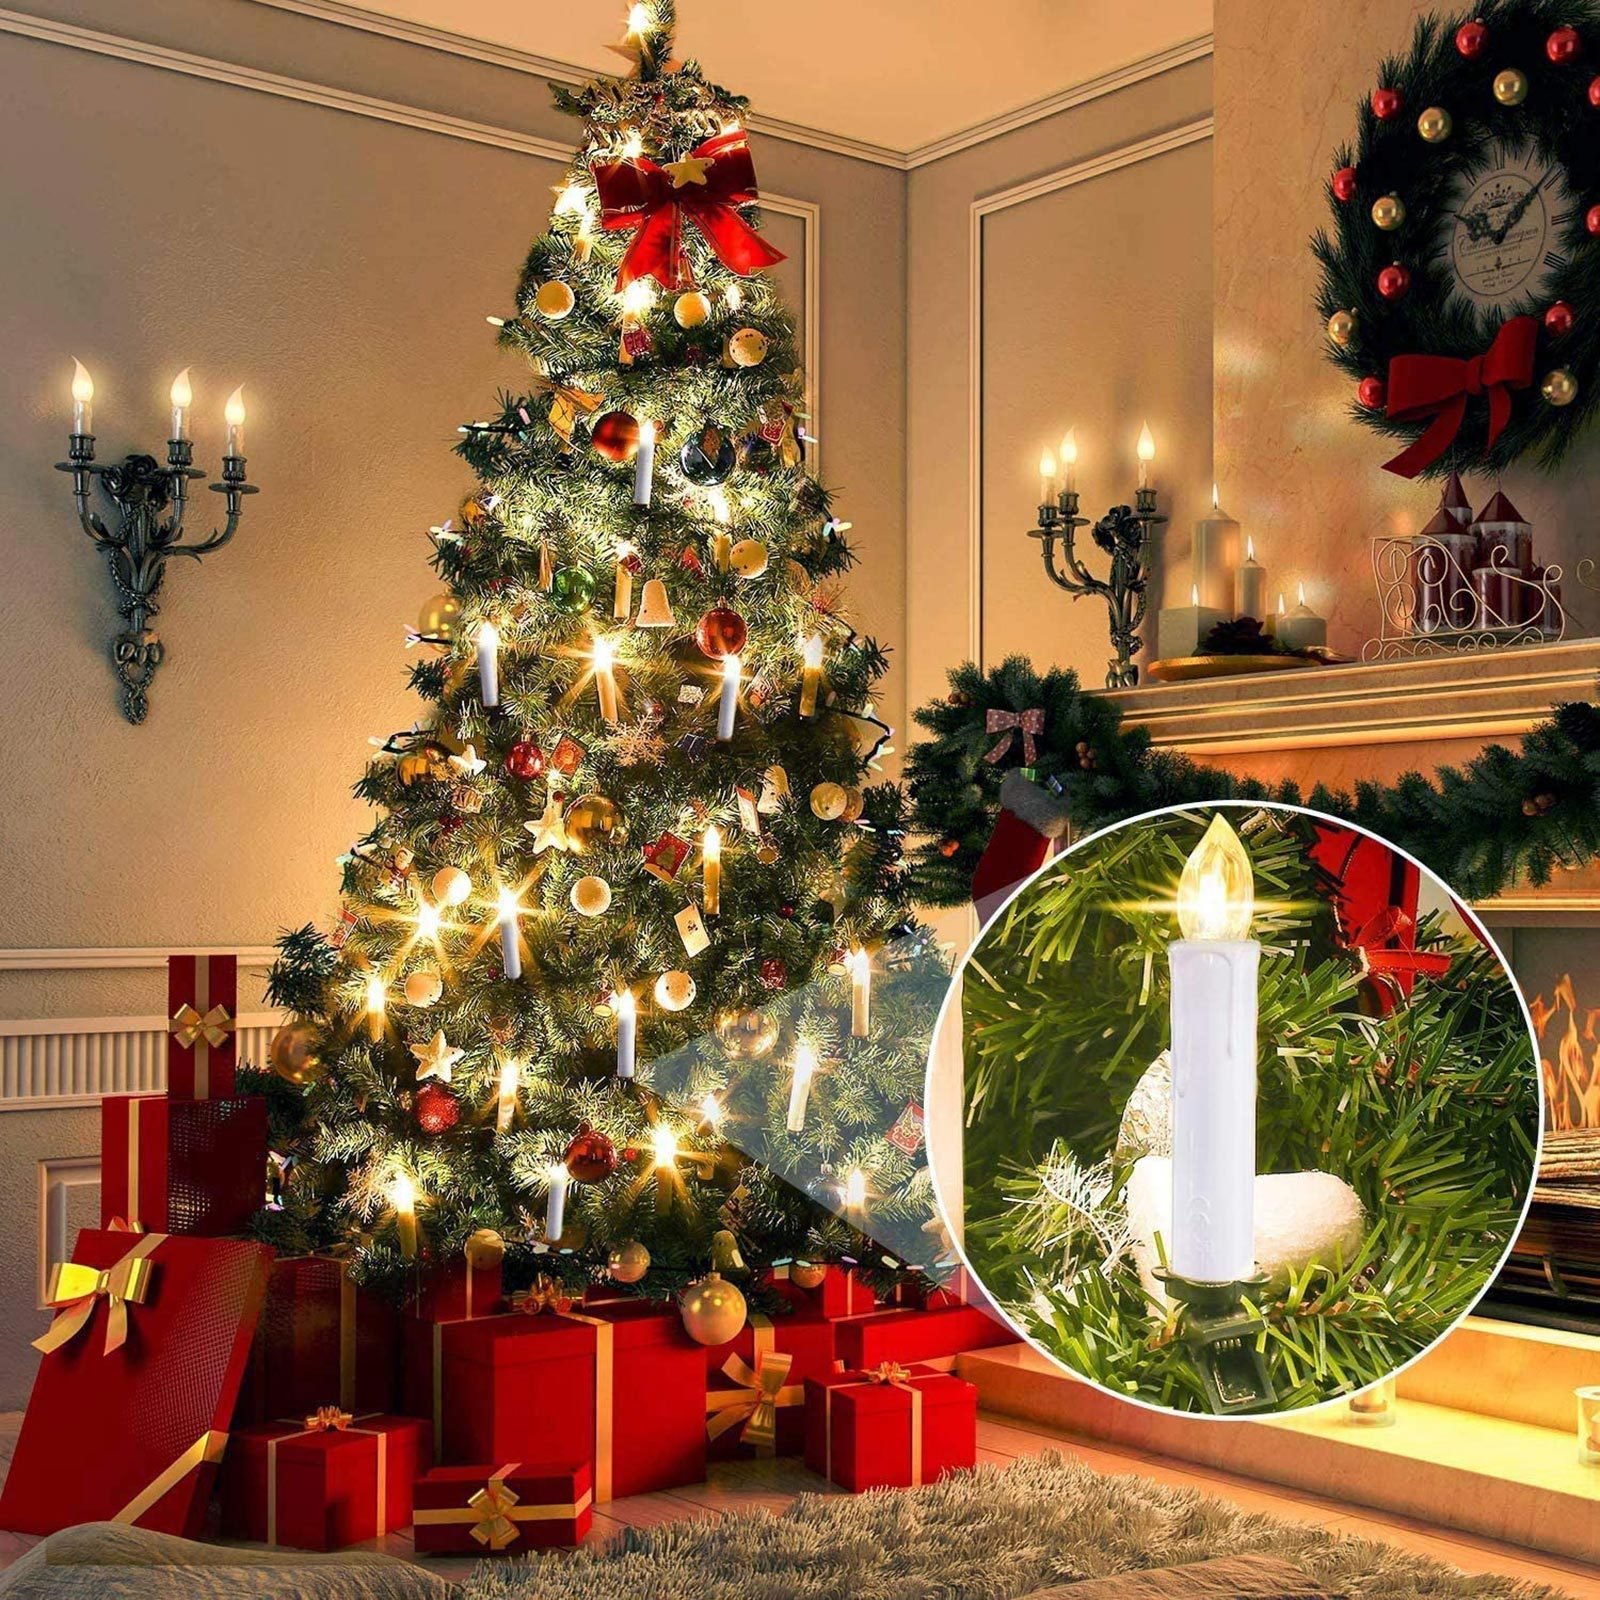 Christmas Tree Remote, Control Your Christmas Lights with the Touch of a  Button 